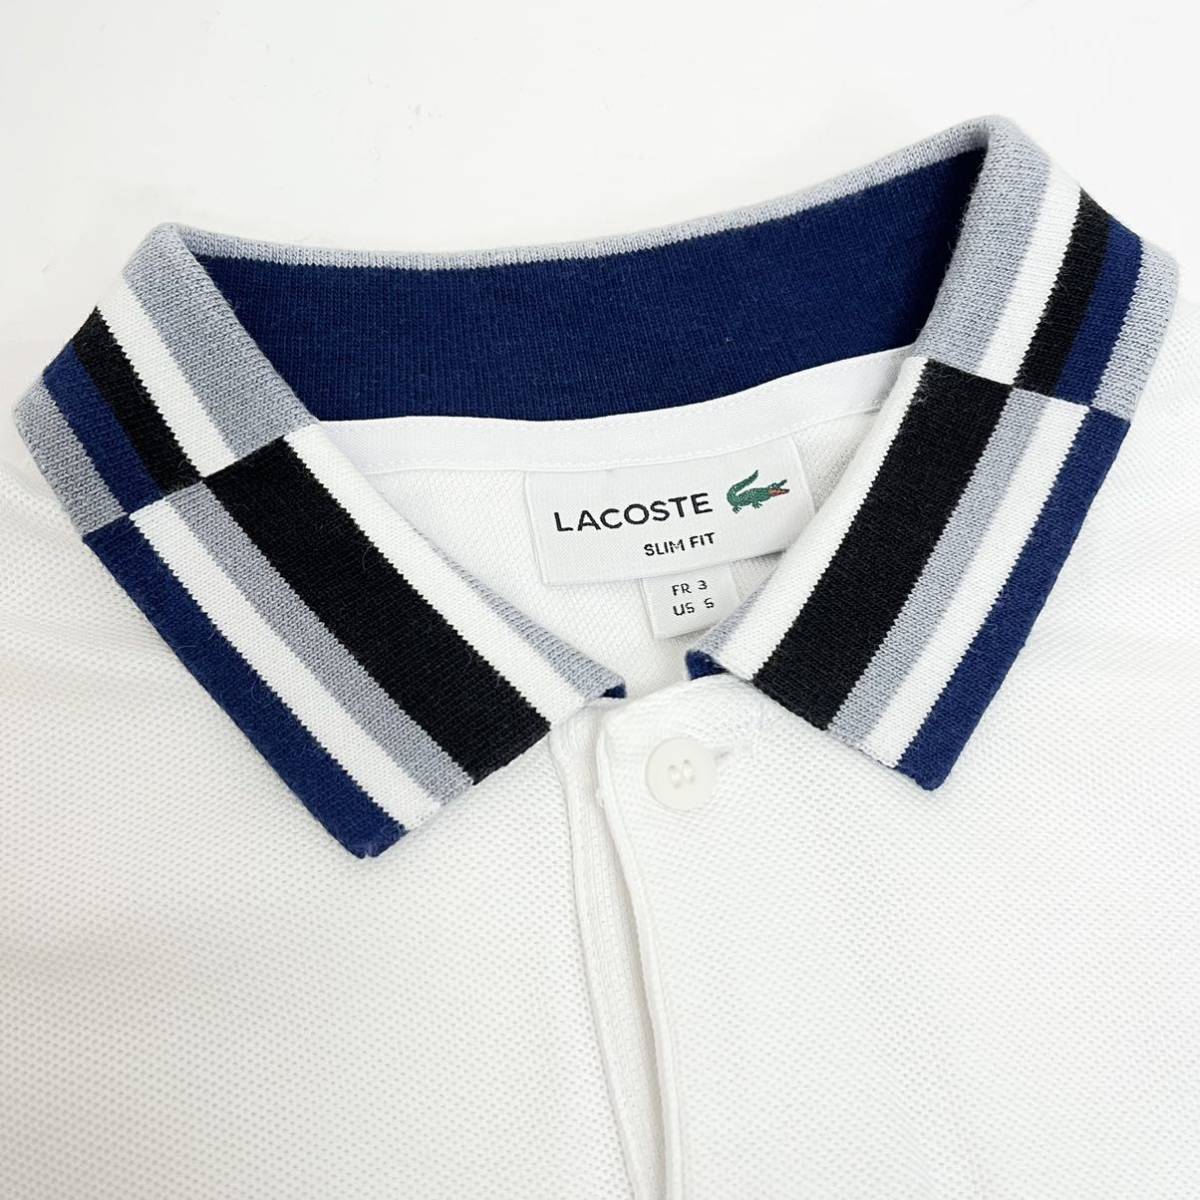 LACOSTE ラコステ カラーブロック ポロシャツ モザイク 限定 レア 希少